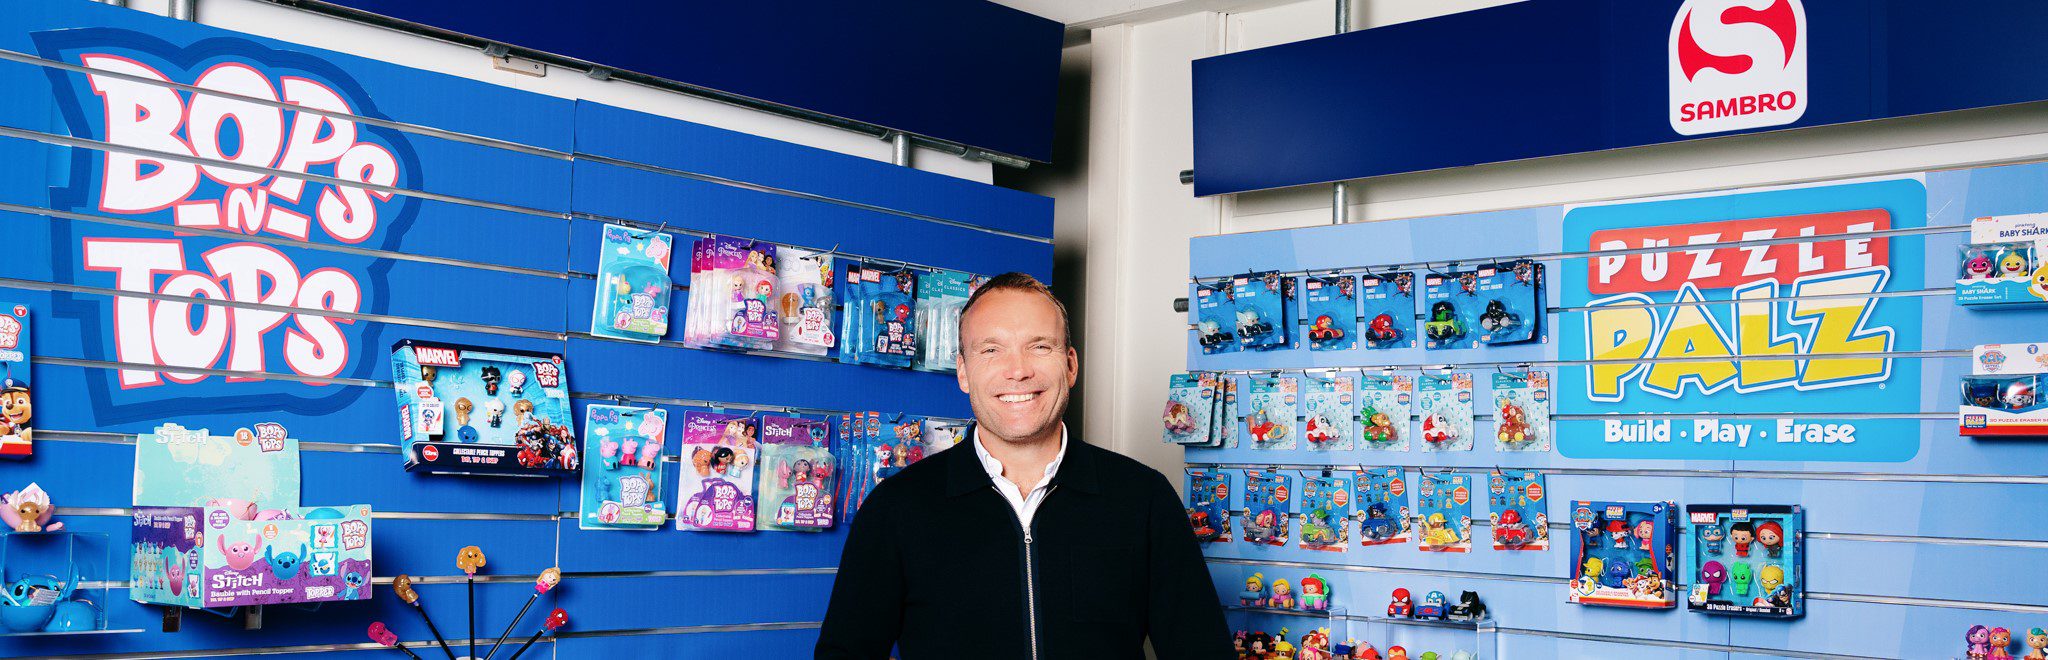 This is an image of Hein, standing in front of some of Sambro's own brand products, Puzzle Palz and Bops n Tops.